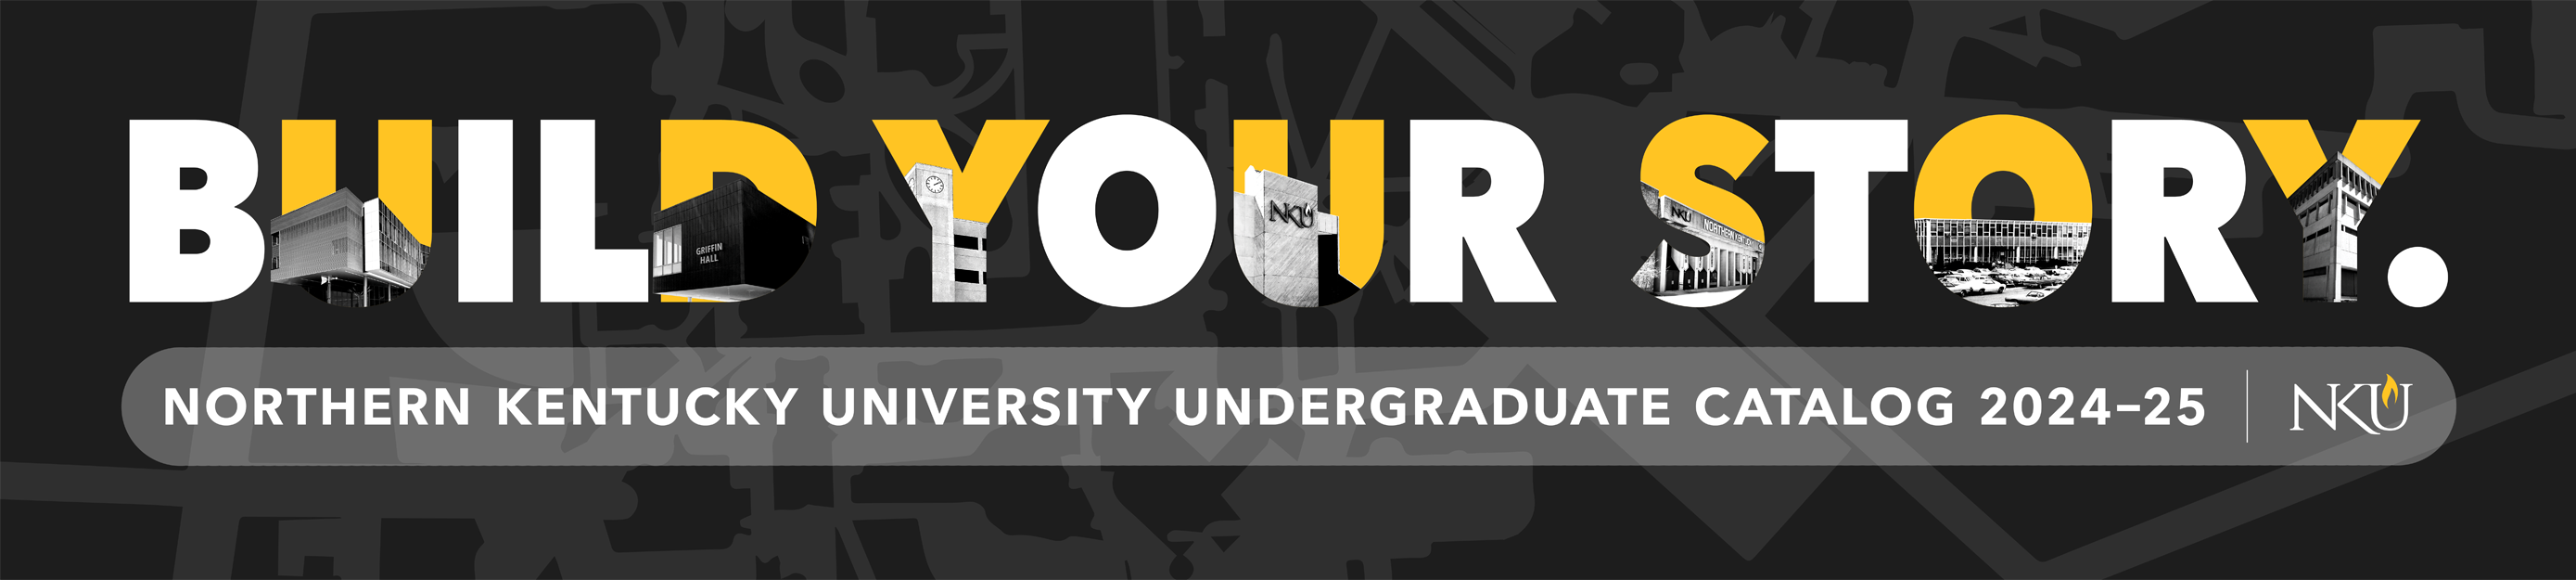 Banner for 2024-2025 Undergraduate Catalog stating "Build Your Story"